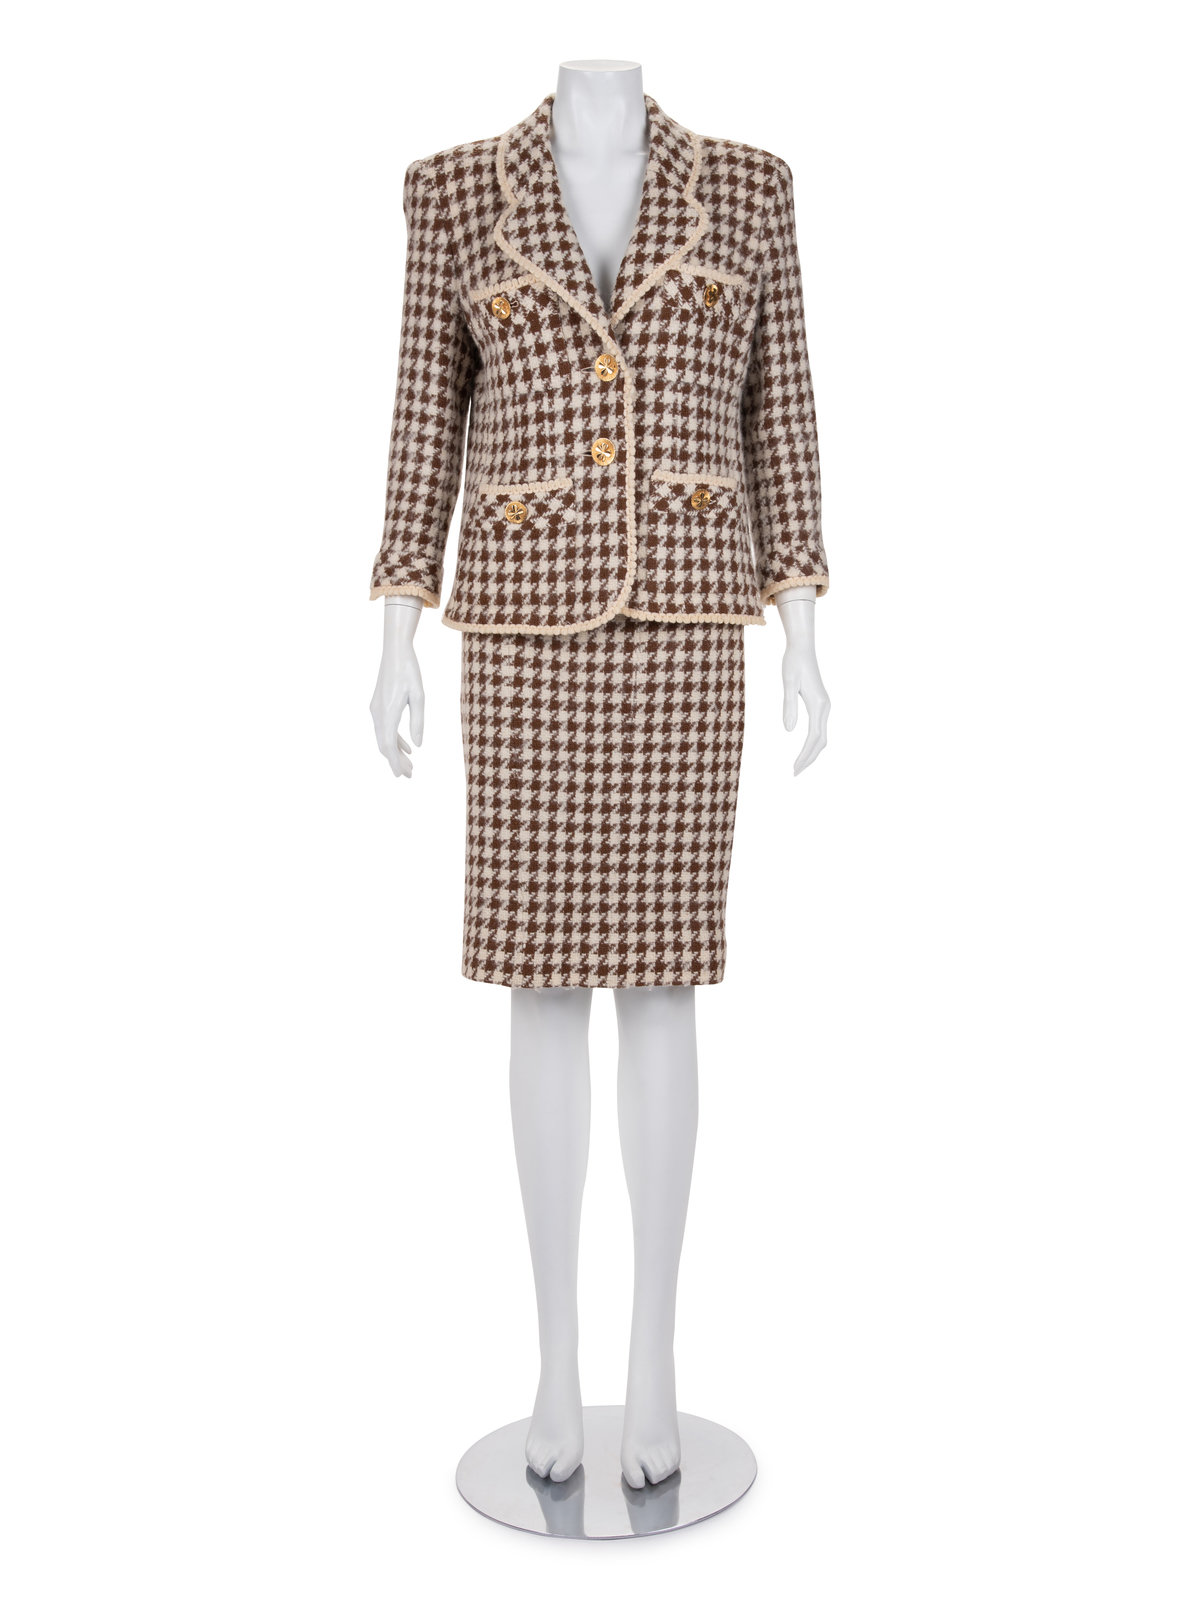 Chanel Two-Piece Houndstooth Skirt Suit, 1990s